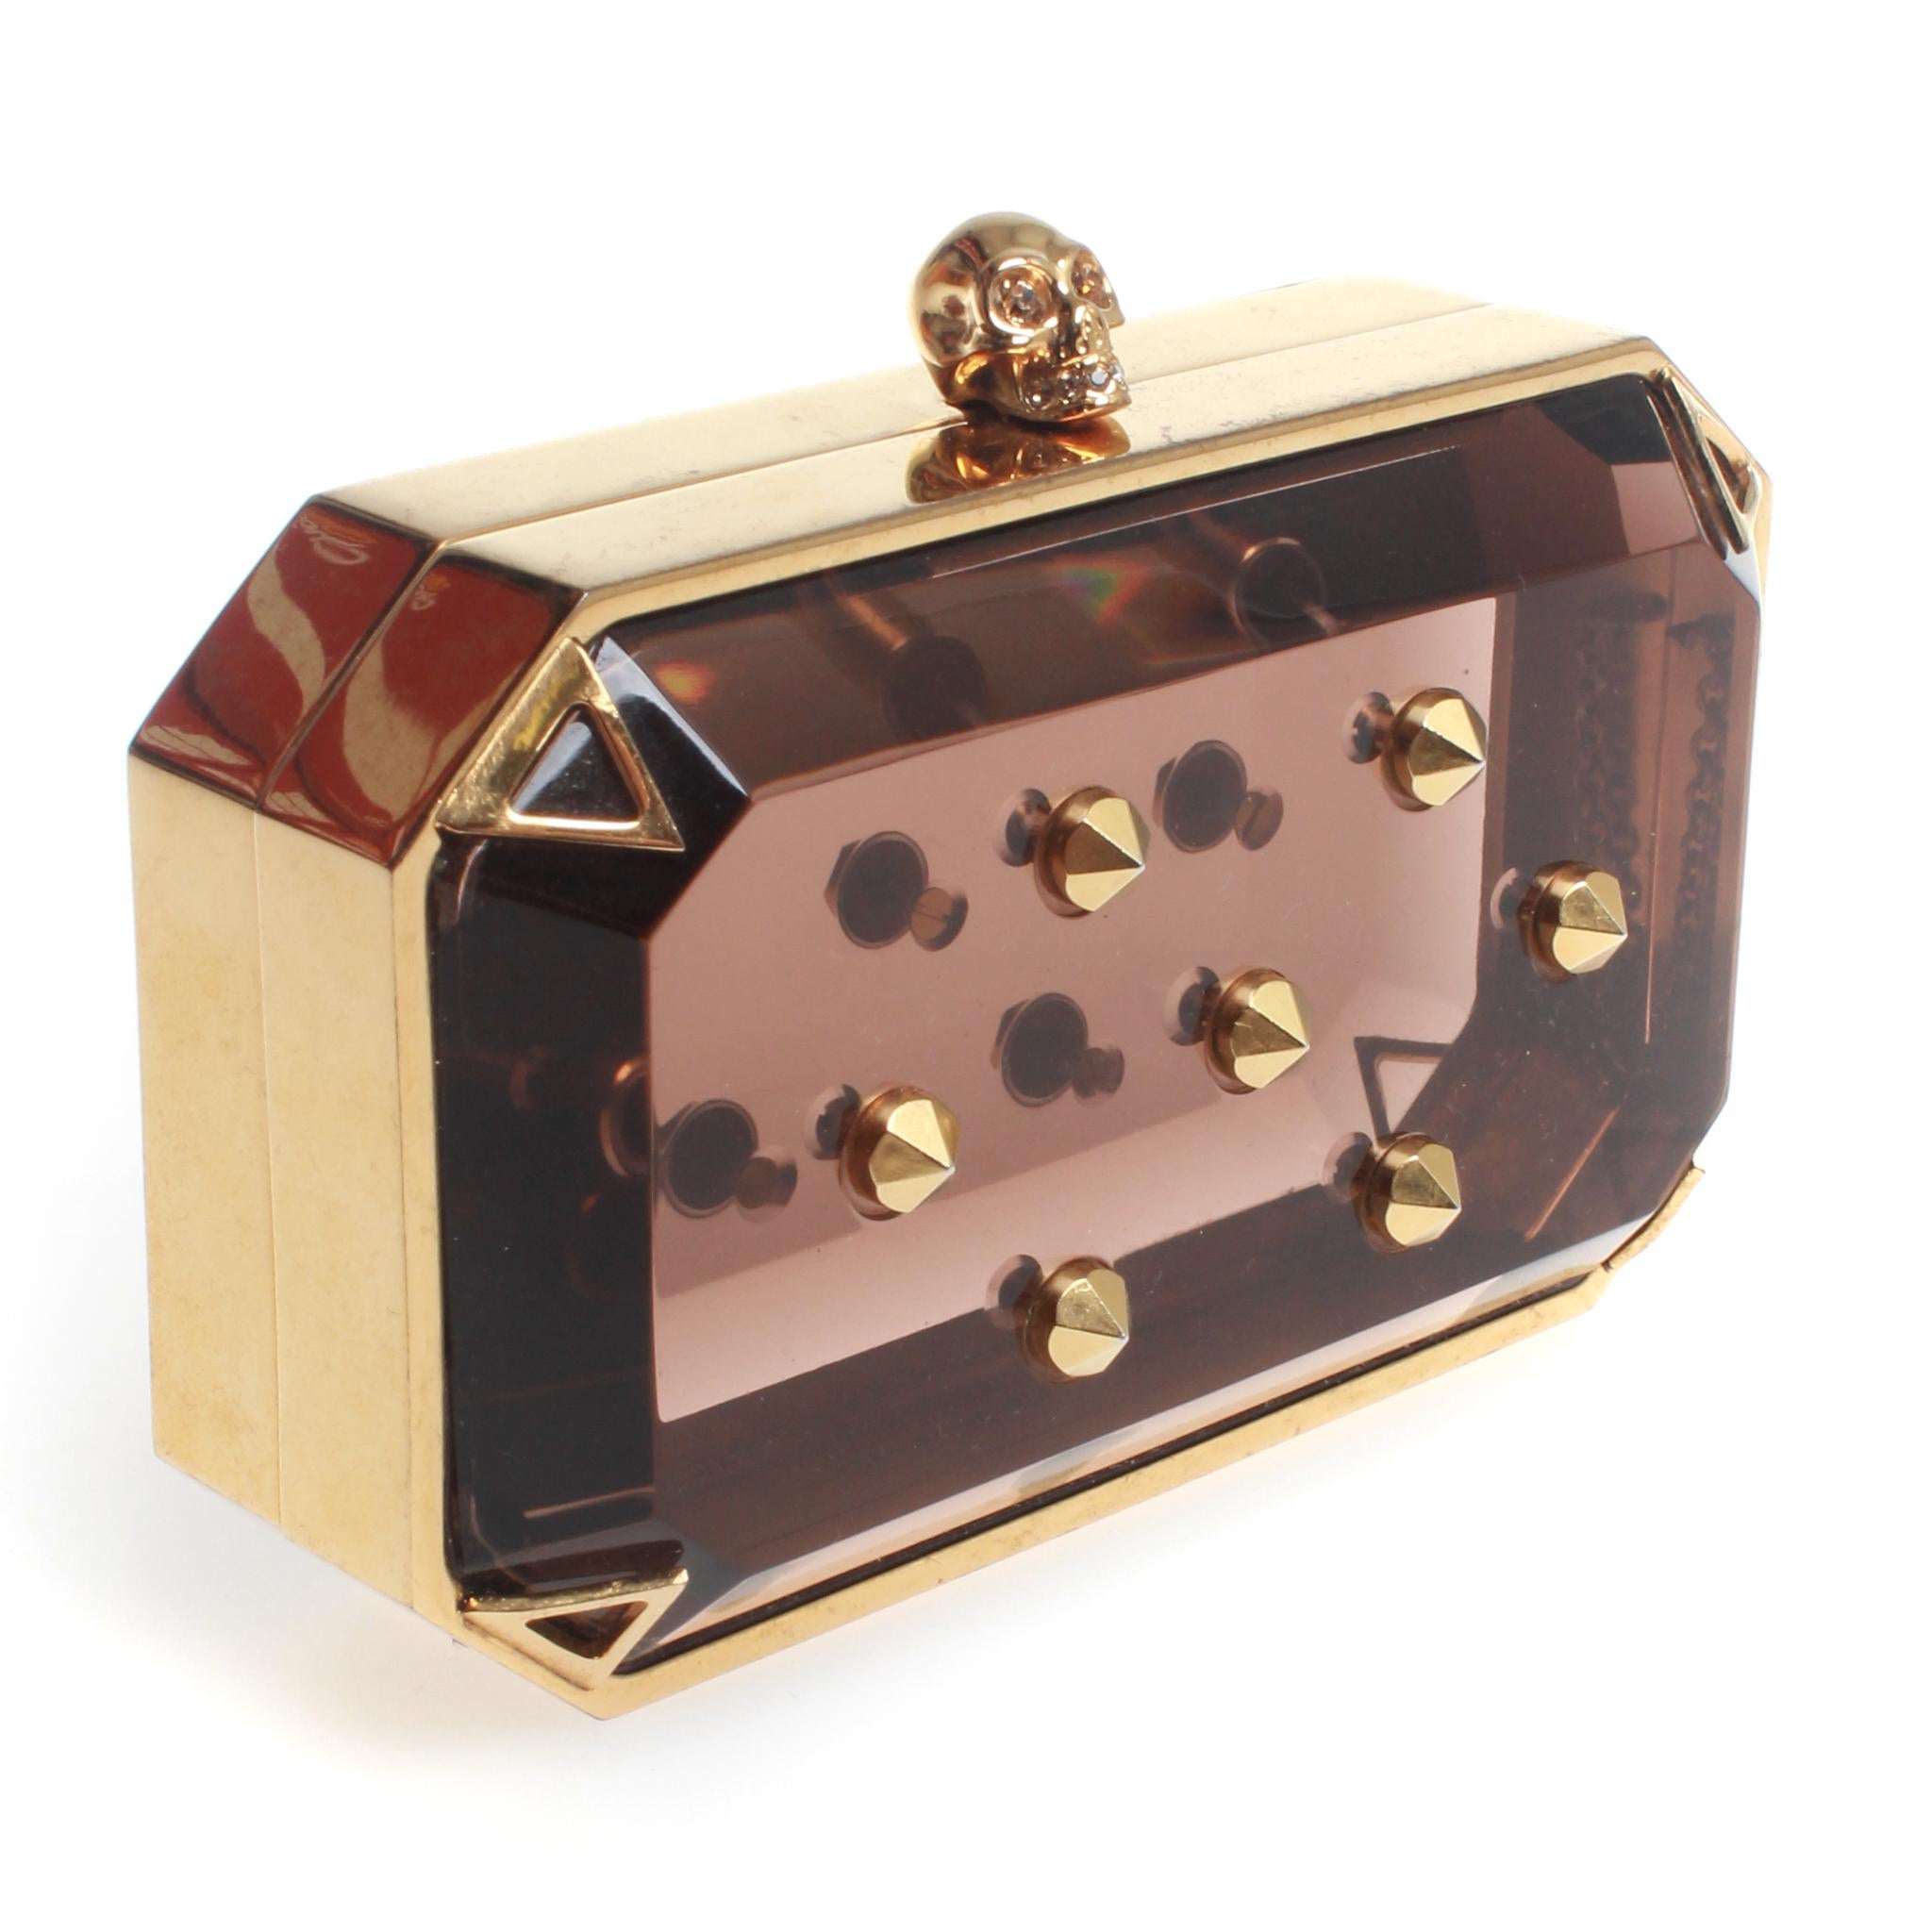 Collectible S/S14 Alexander McQueen amber plexiglass mini skull clutch embellished with gold toned studs. This box clutch features iconic skull head closure. Made in Italy.